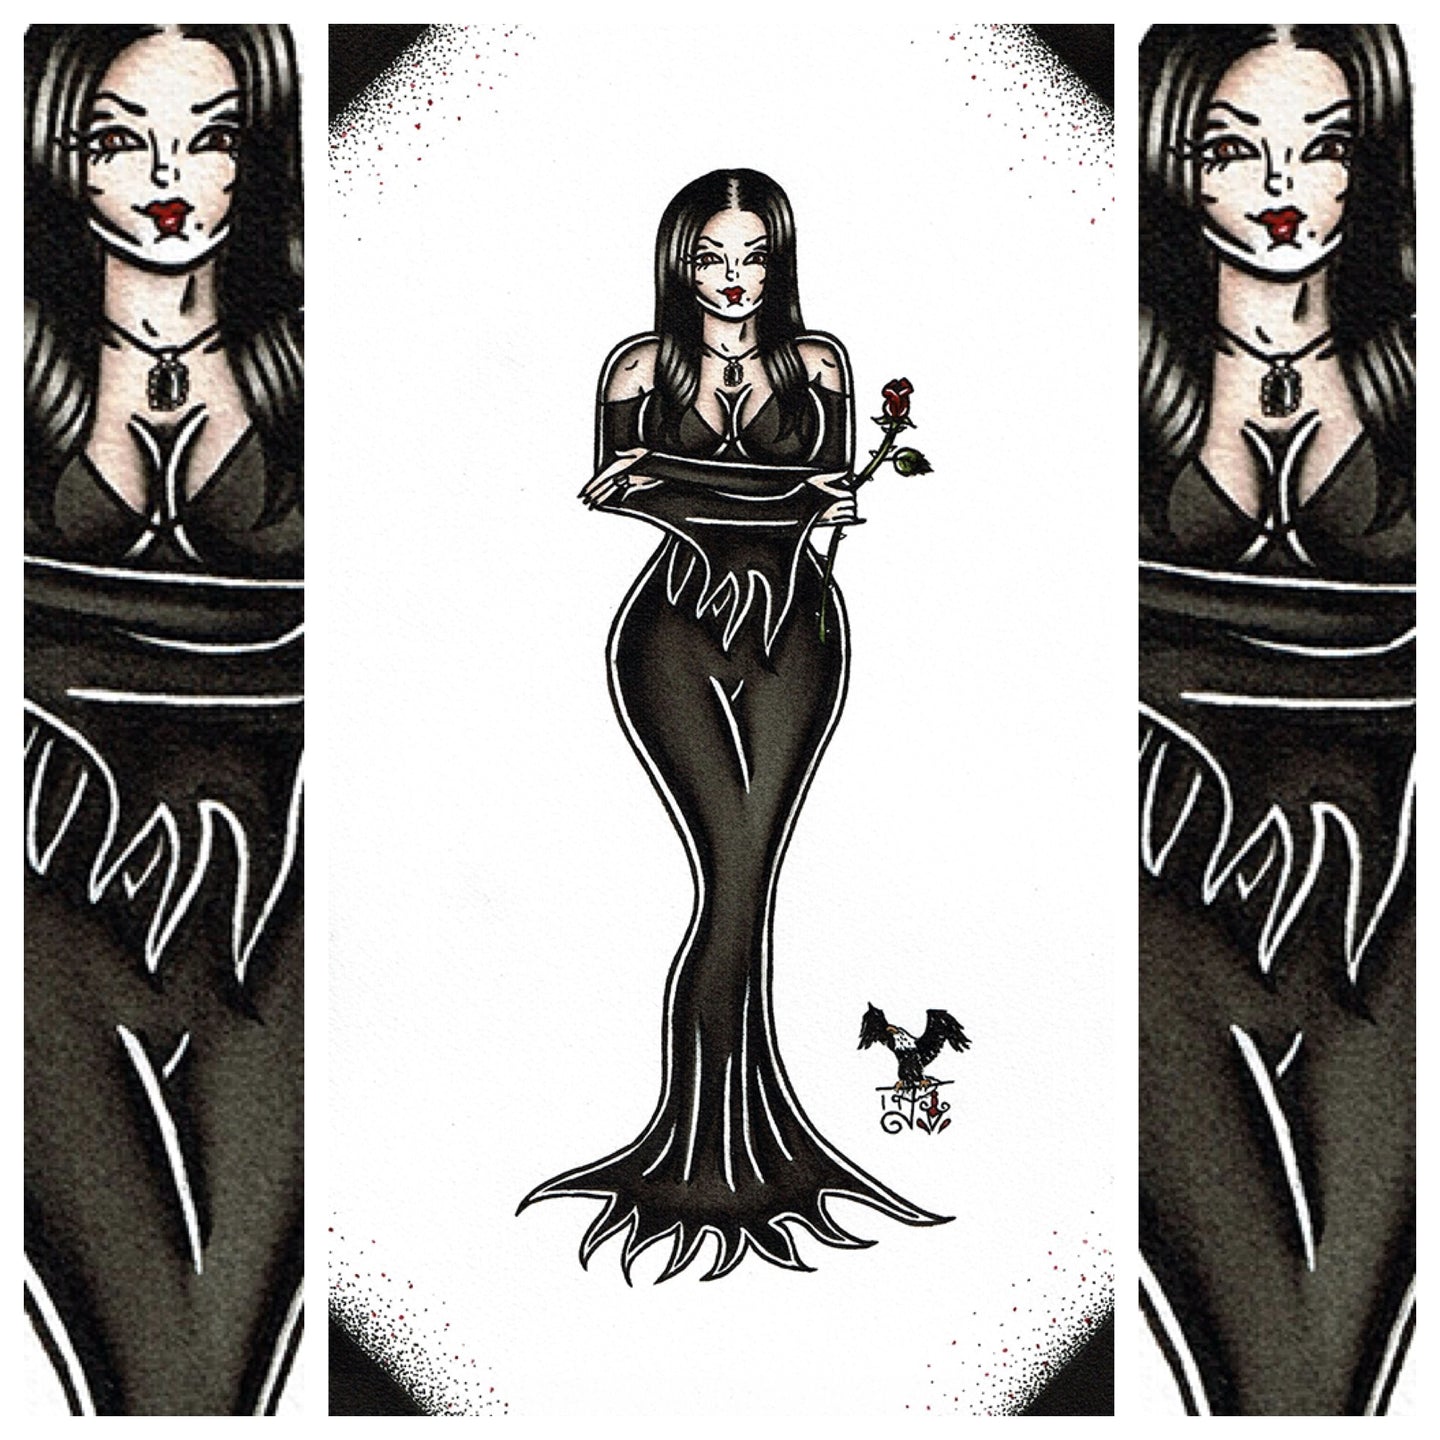 American Traditional tattoo flash sexy Morticia Addams pinup spitshade painting.